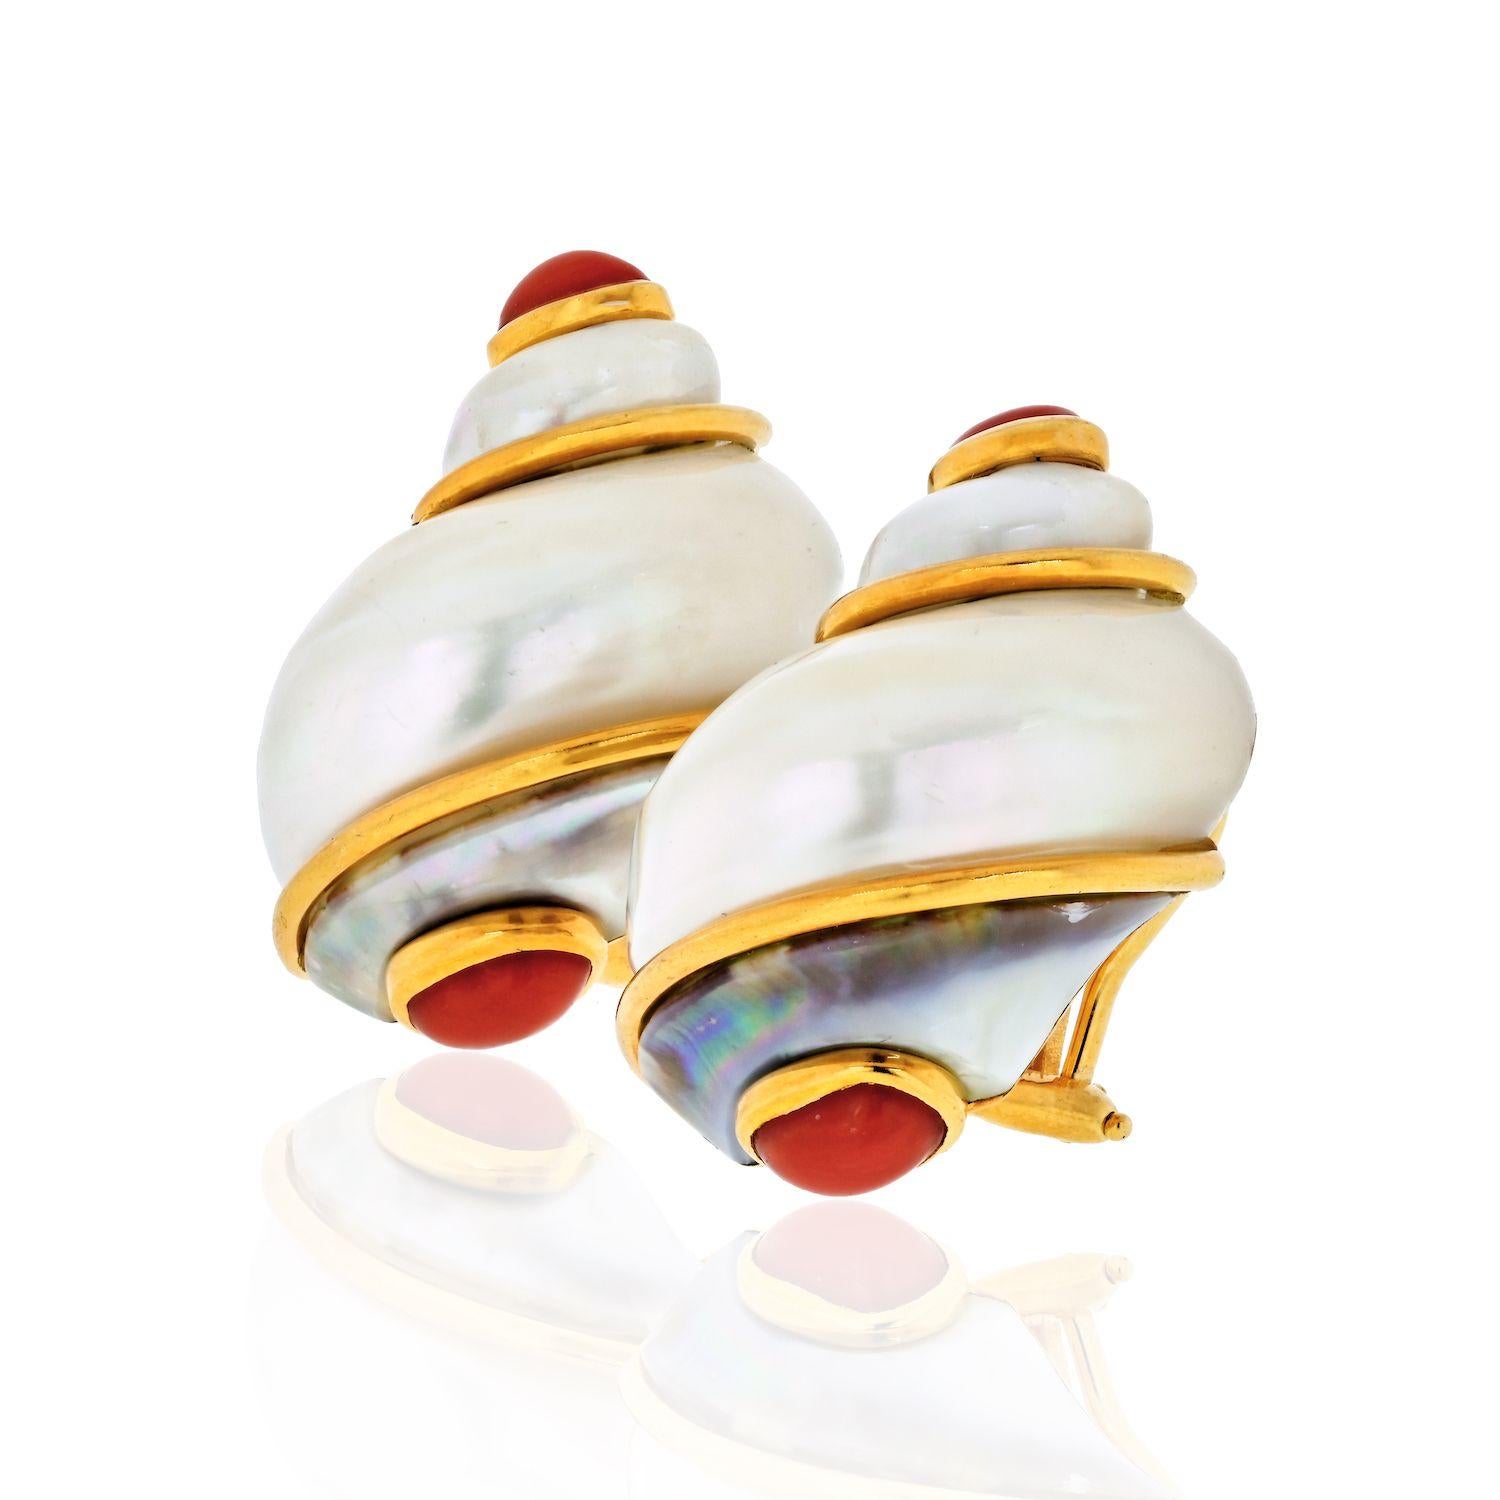 TURBO SHELL AND CORAL EARRINGS, 18K GOLD, SIGNED SEAMAN SCHEPPS. LENGTH 1.25. 

The shells of this sea snail species, which dates back 100 million years to the Upper Cretaceous period, feature a distinctive spiral sculpture with an inner layer of